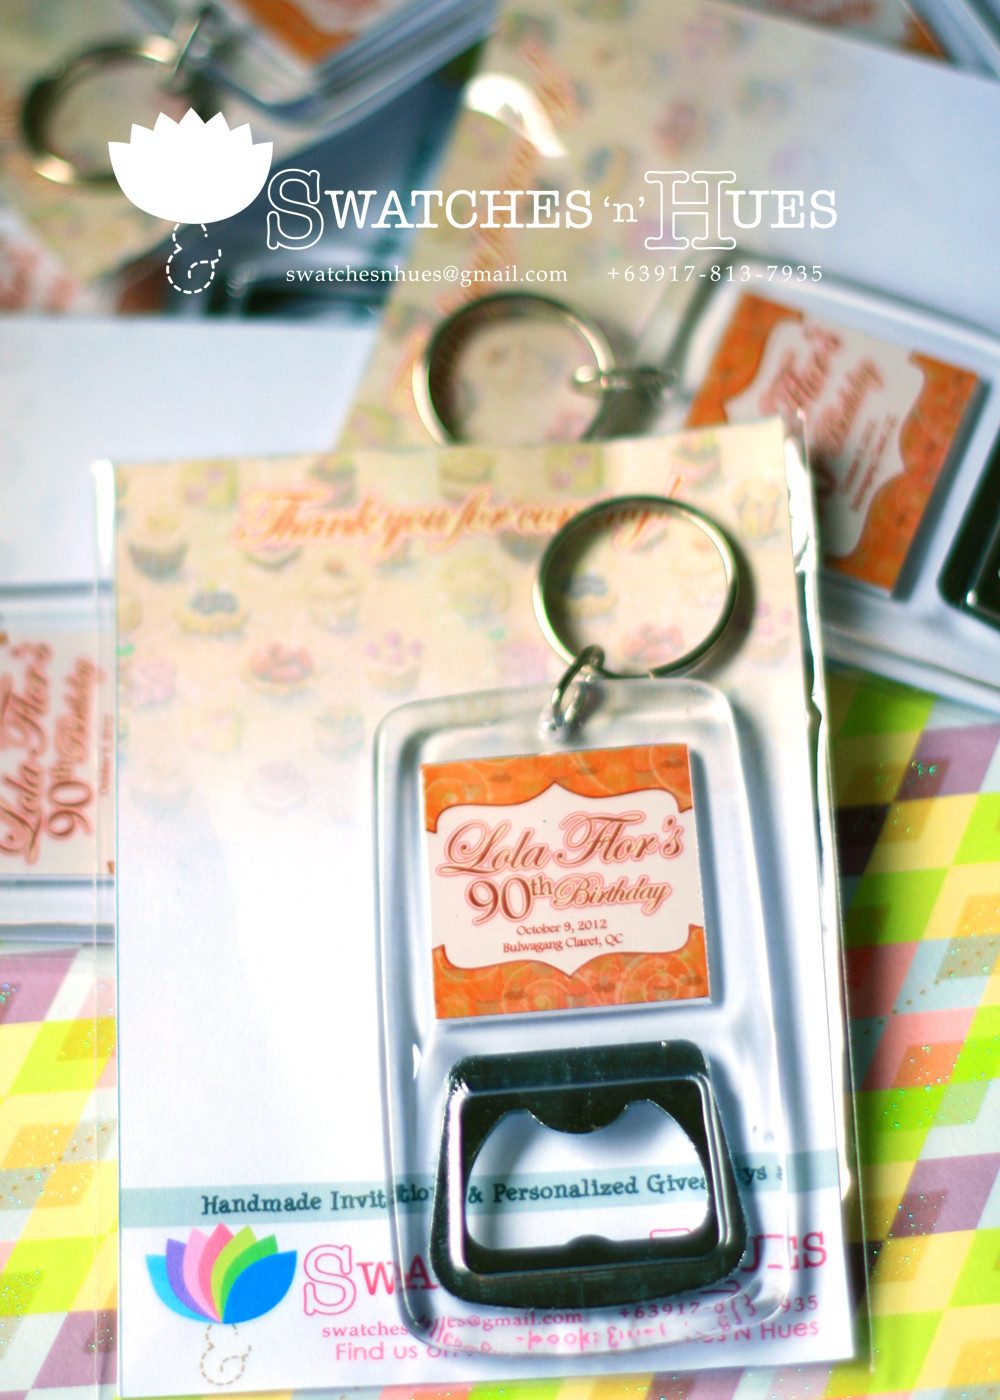 90th Birthday Party Favors
 Swatches & Hues Handmade with TLC Party favors for a